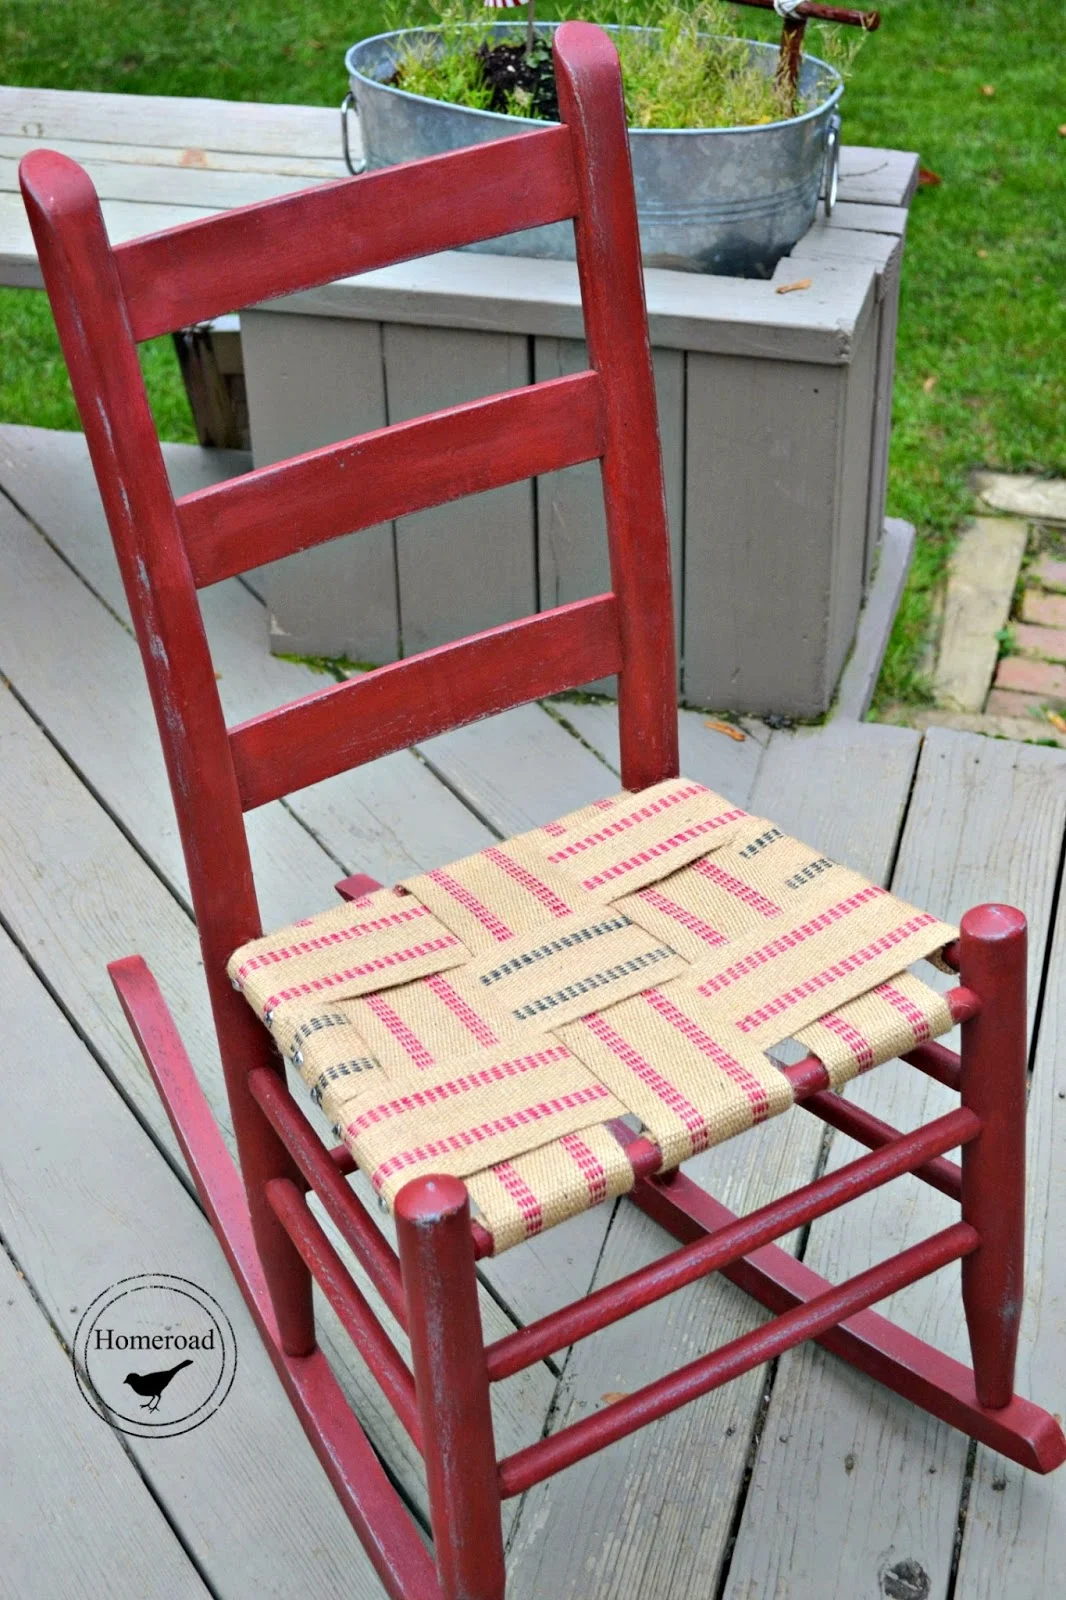 Antique Rocker with an Upholstery Webbing Seat